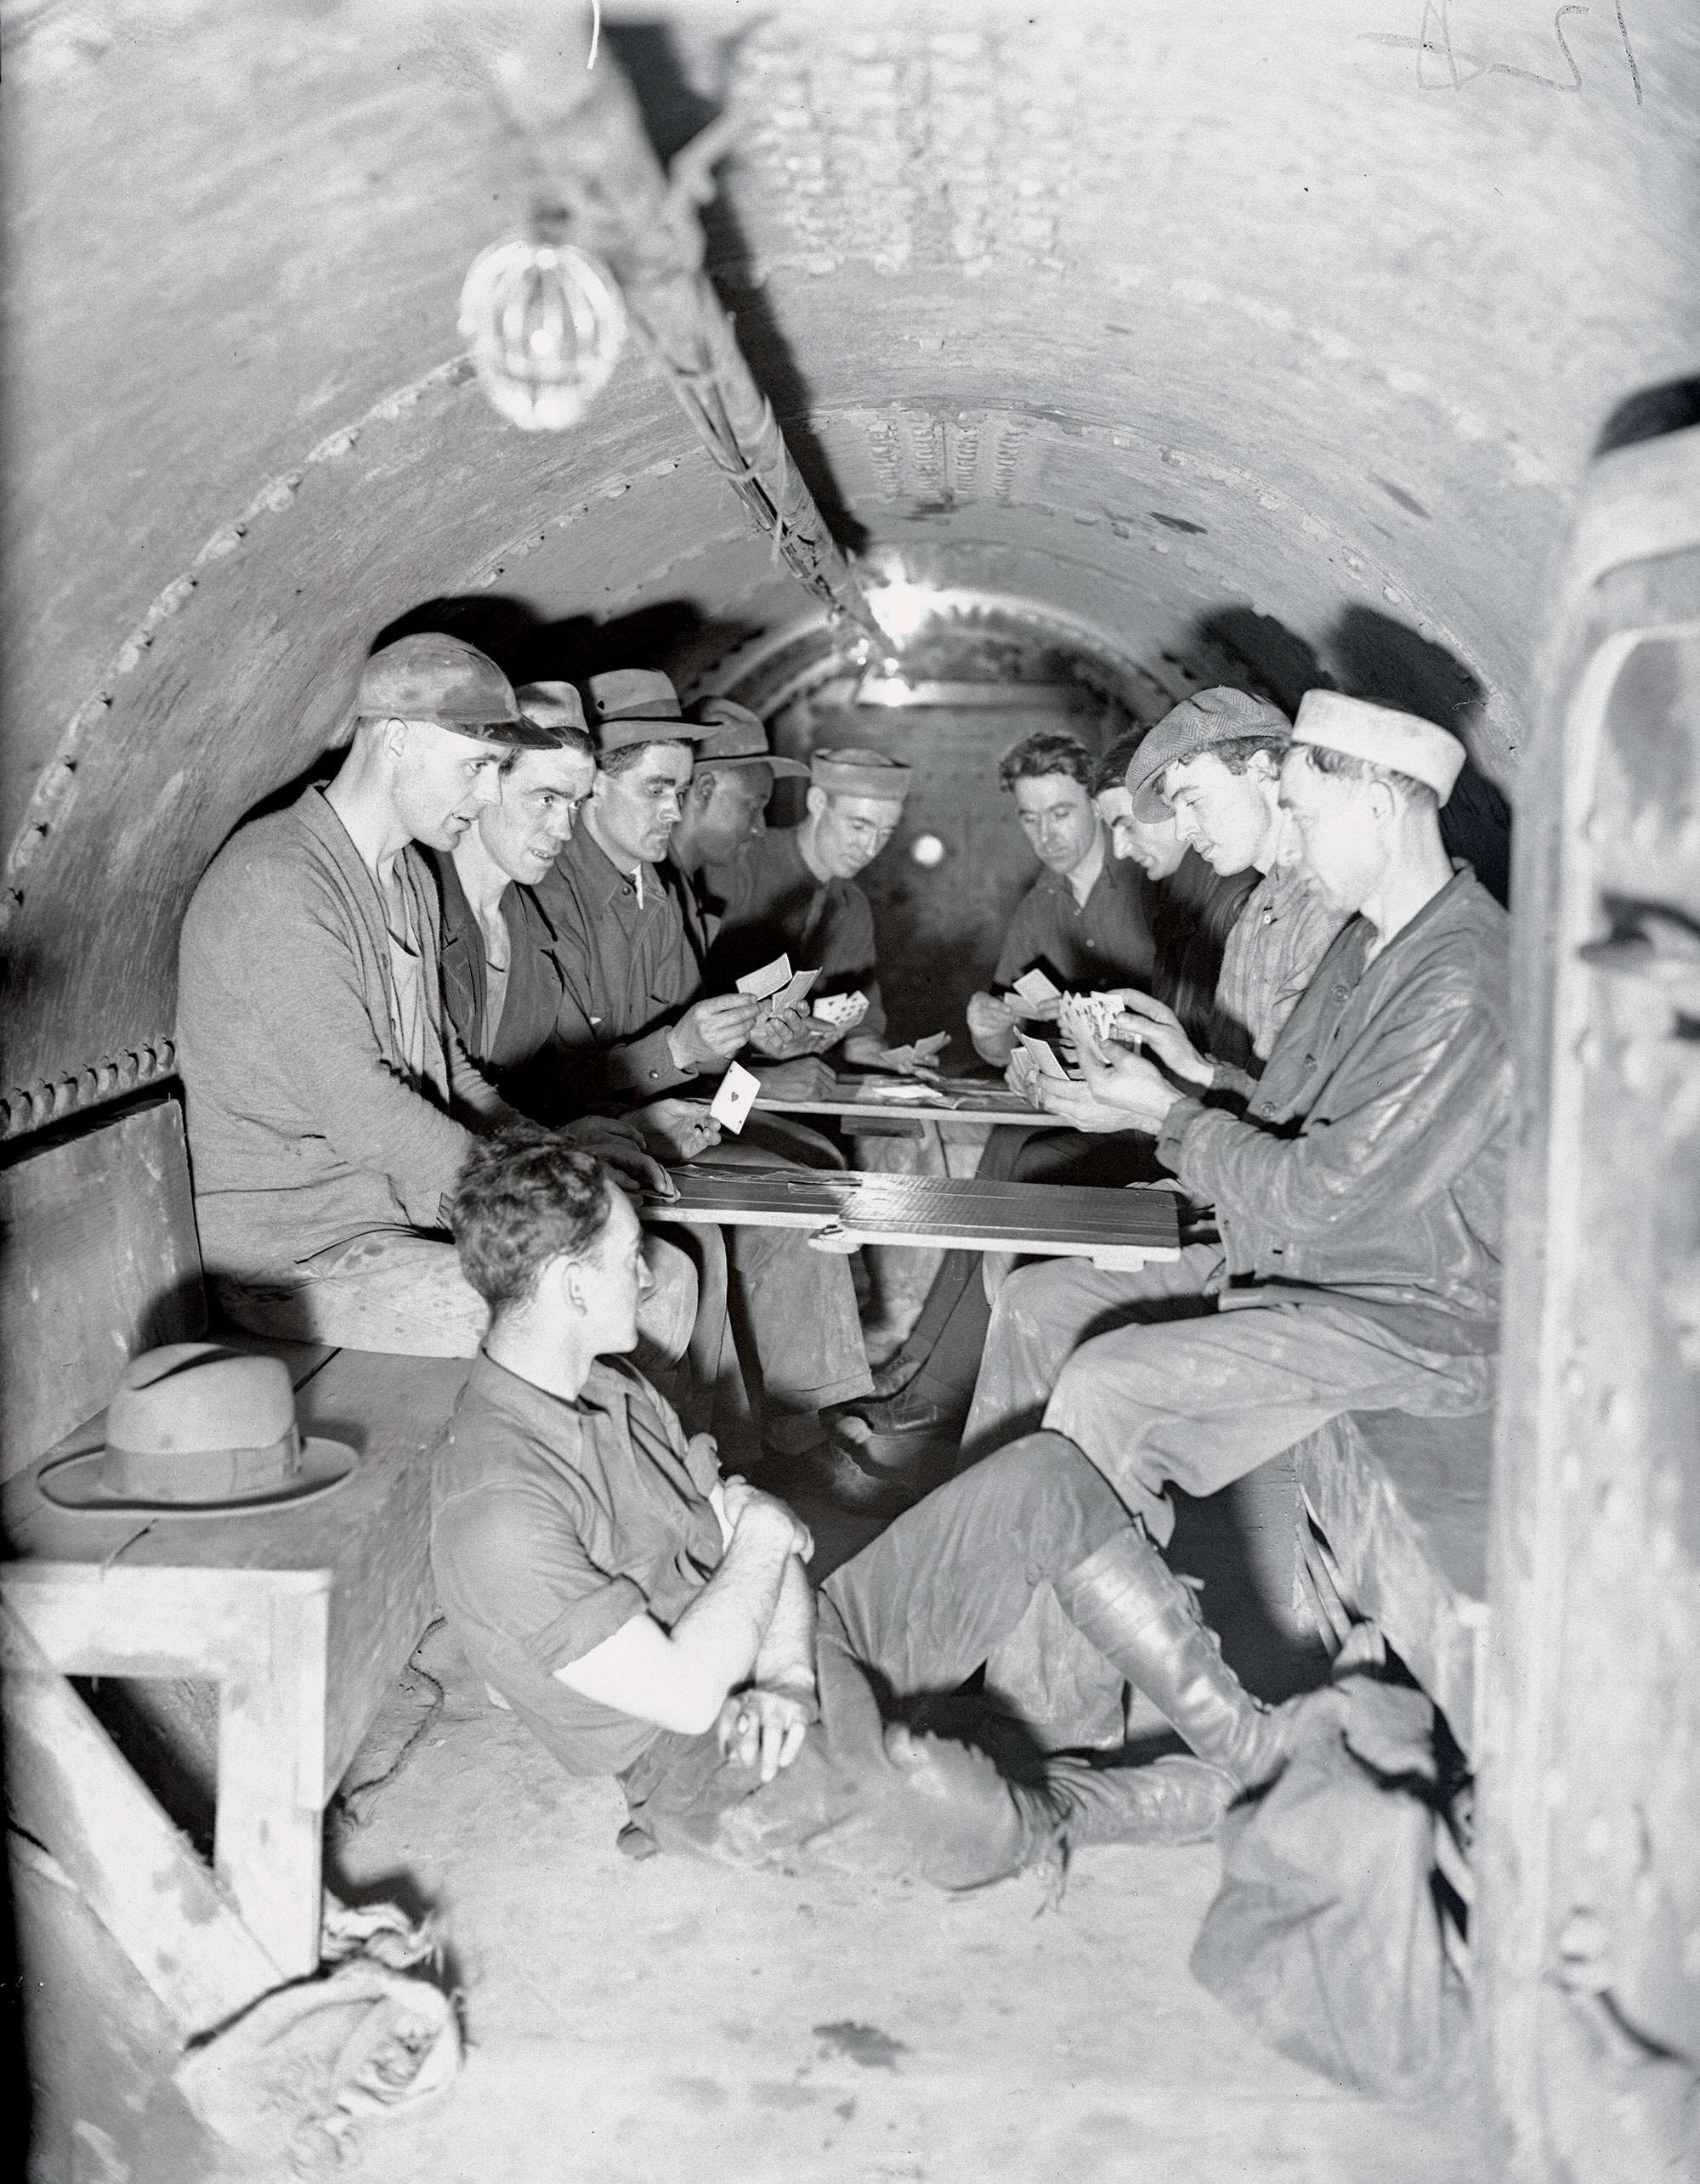 Portraits of subway workers playing cards in a cramped cylindrical chamber